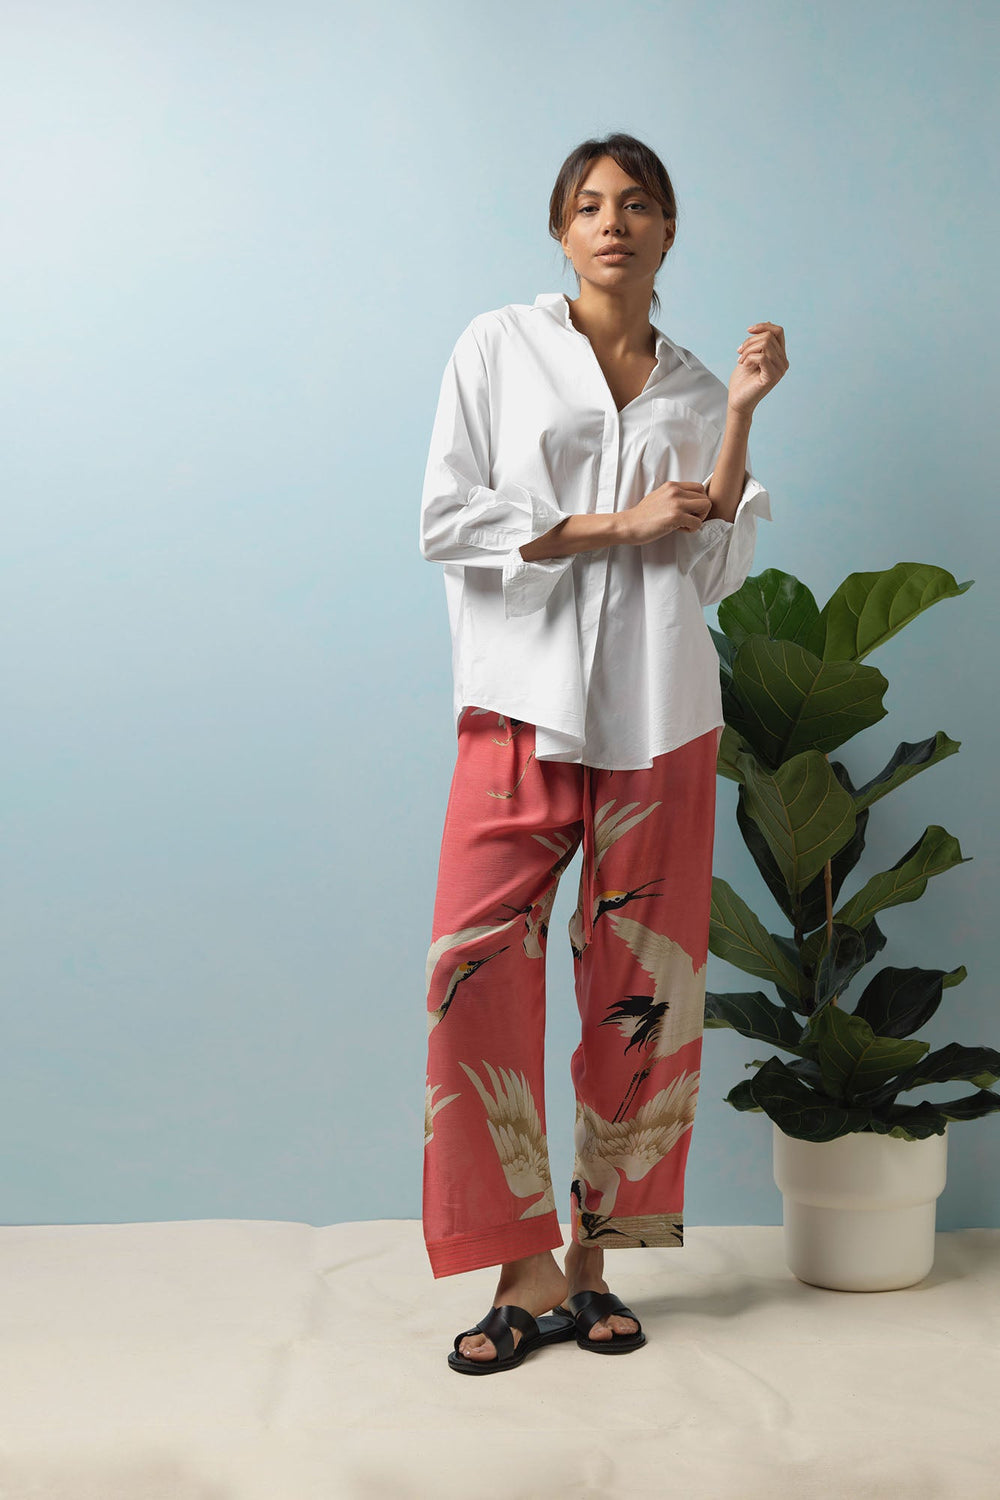 The One Hundred Stars Stork Crane Lipstick Pink Crepe Lounge Pants can be styled in multiple different ways, they can dressed up with a white shirt for a casual relaxed outfit. 